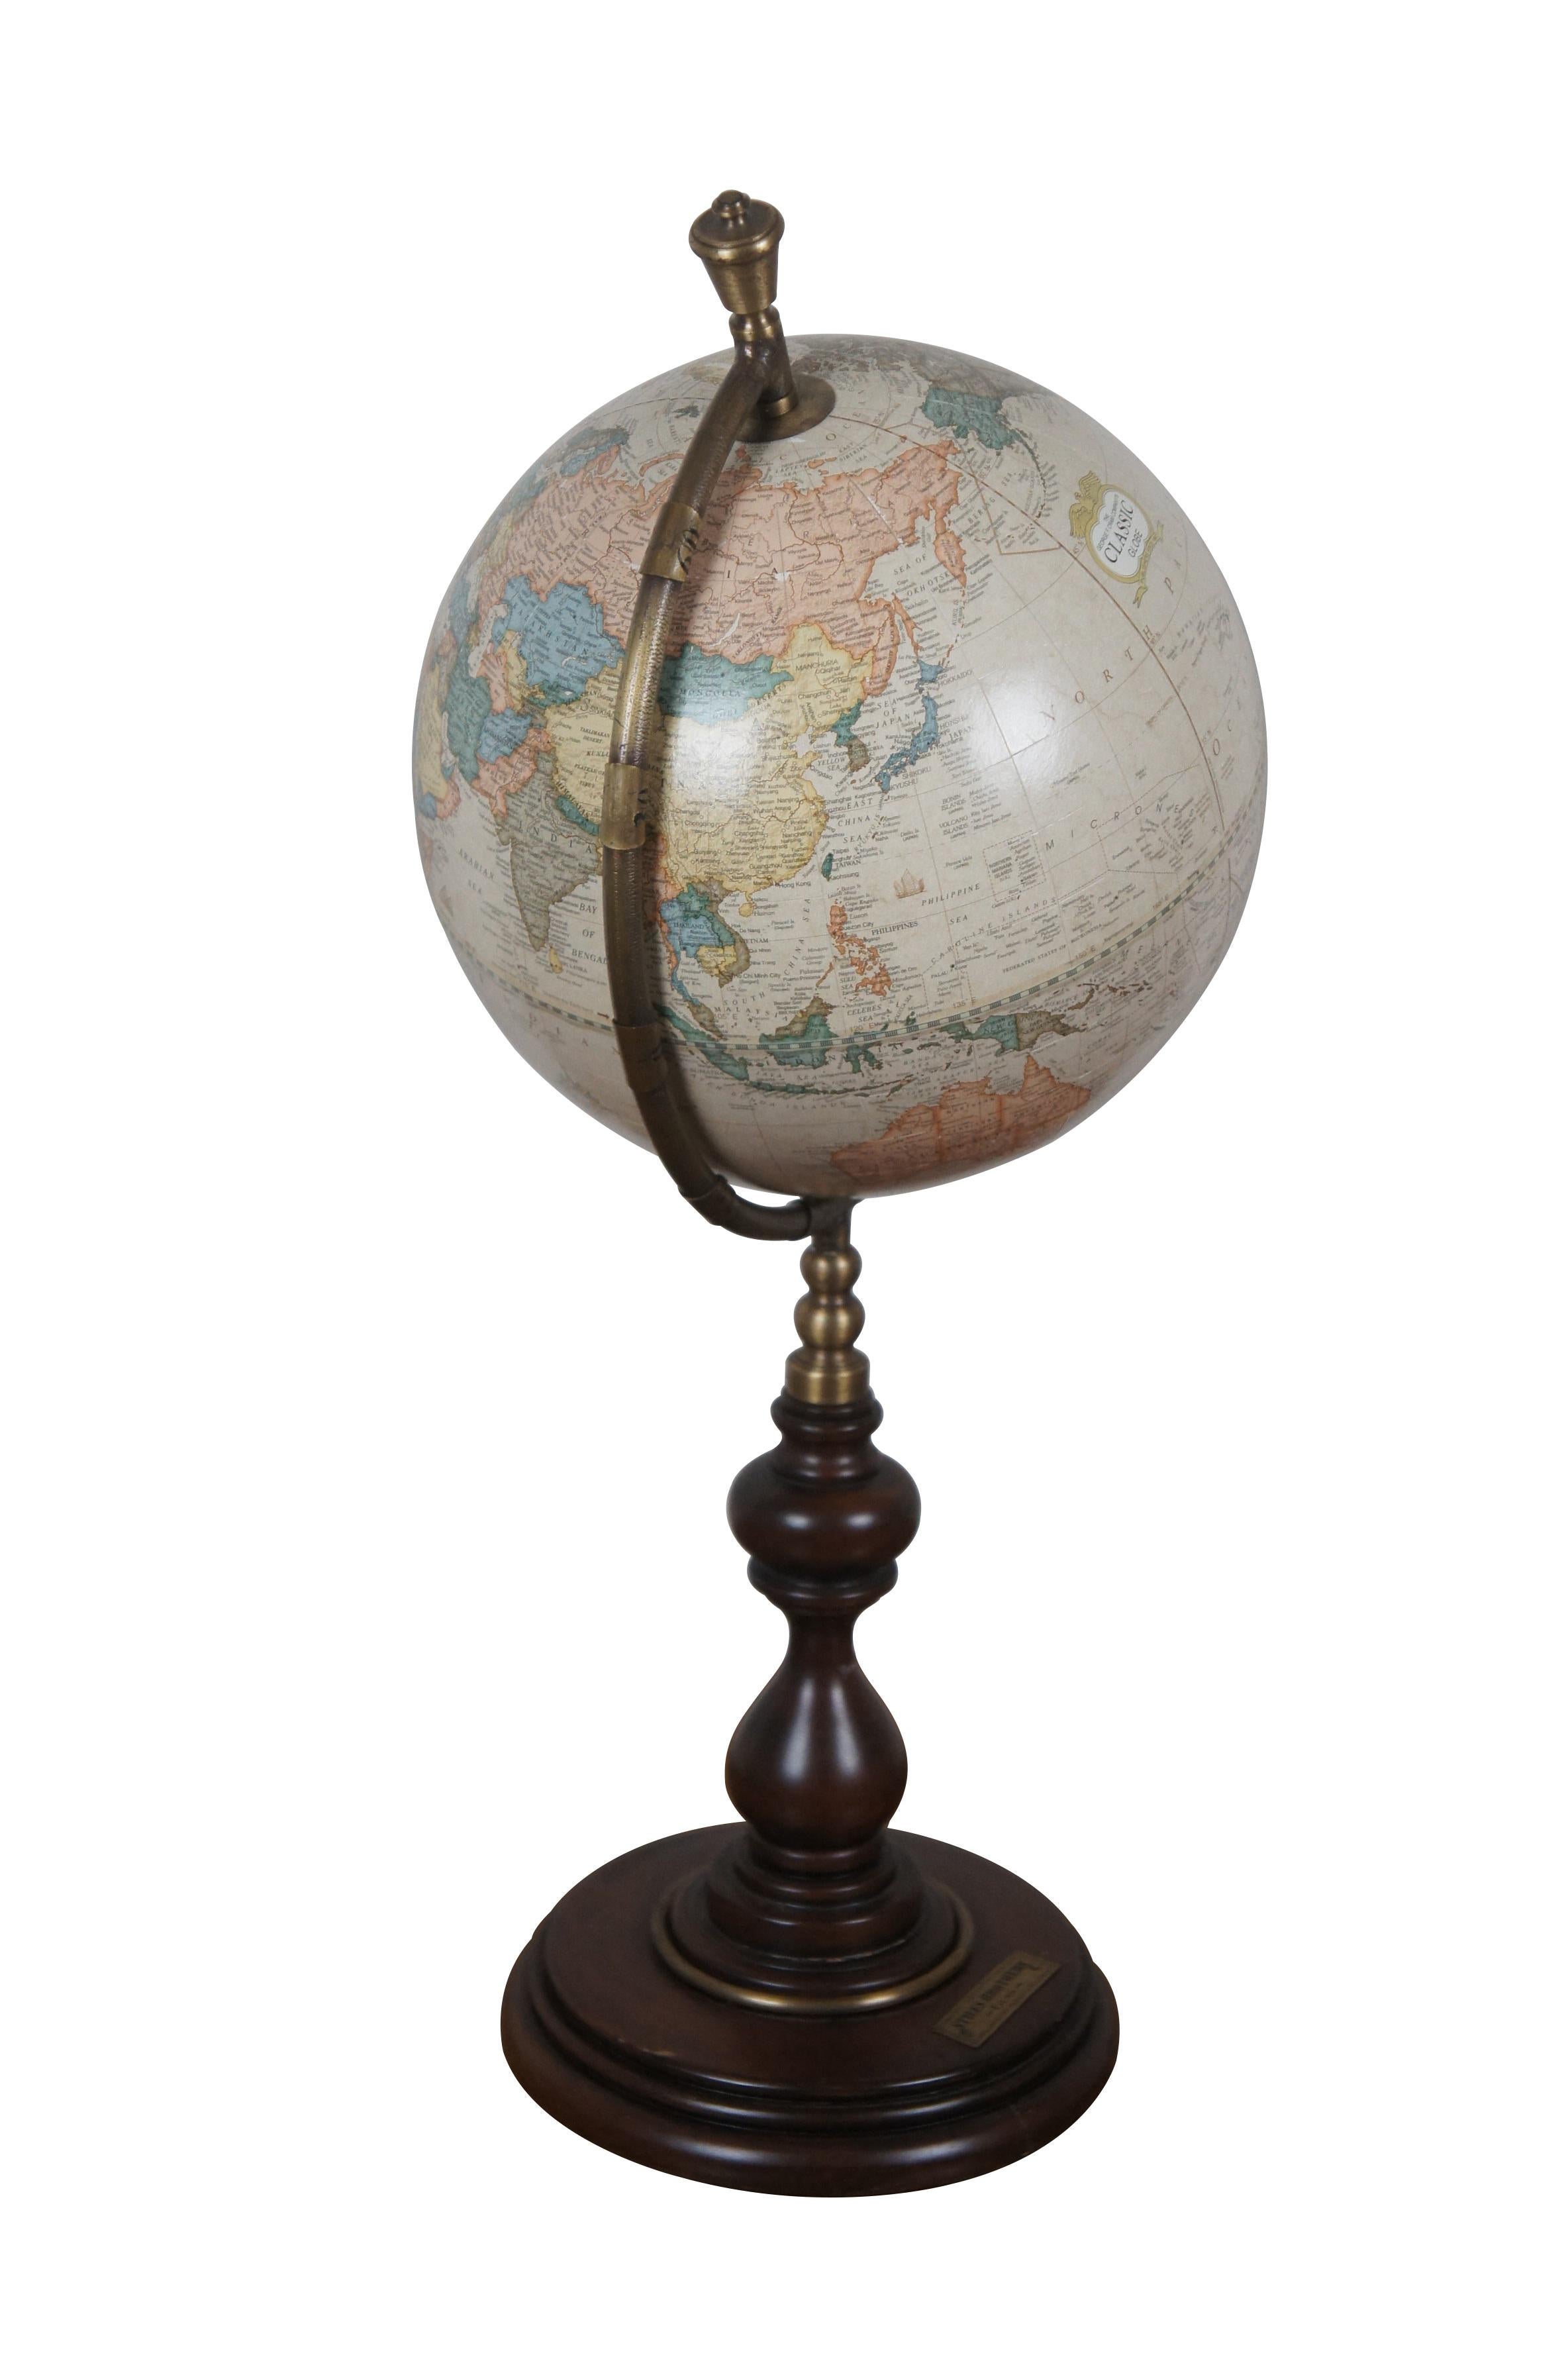 Late 20th century Stiles Brothers and George F. Cram Company Classic desktop globe. Turned pedestal base with brass meridian and finial. Made in USA.

Dimensions:
9.5